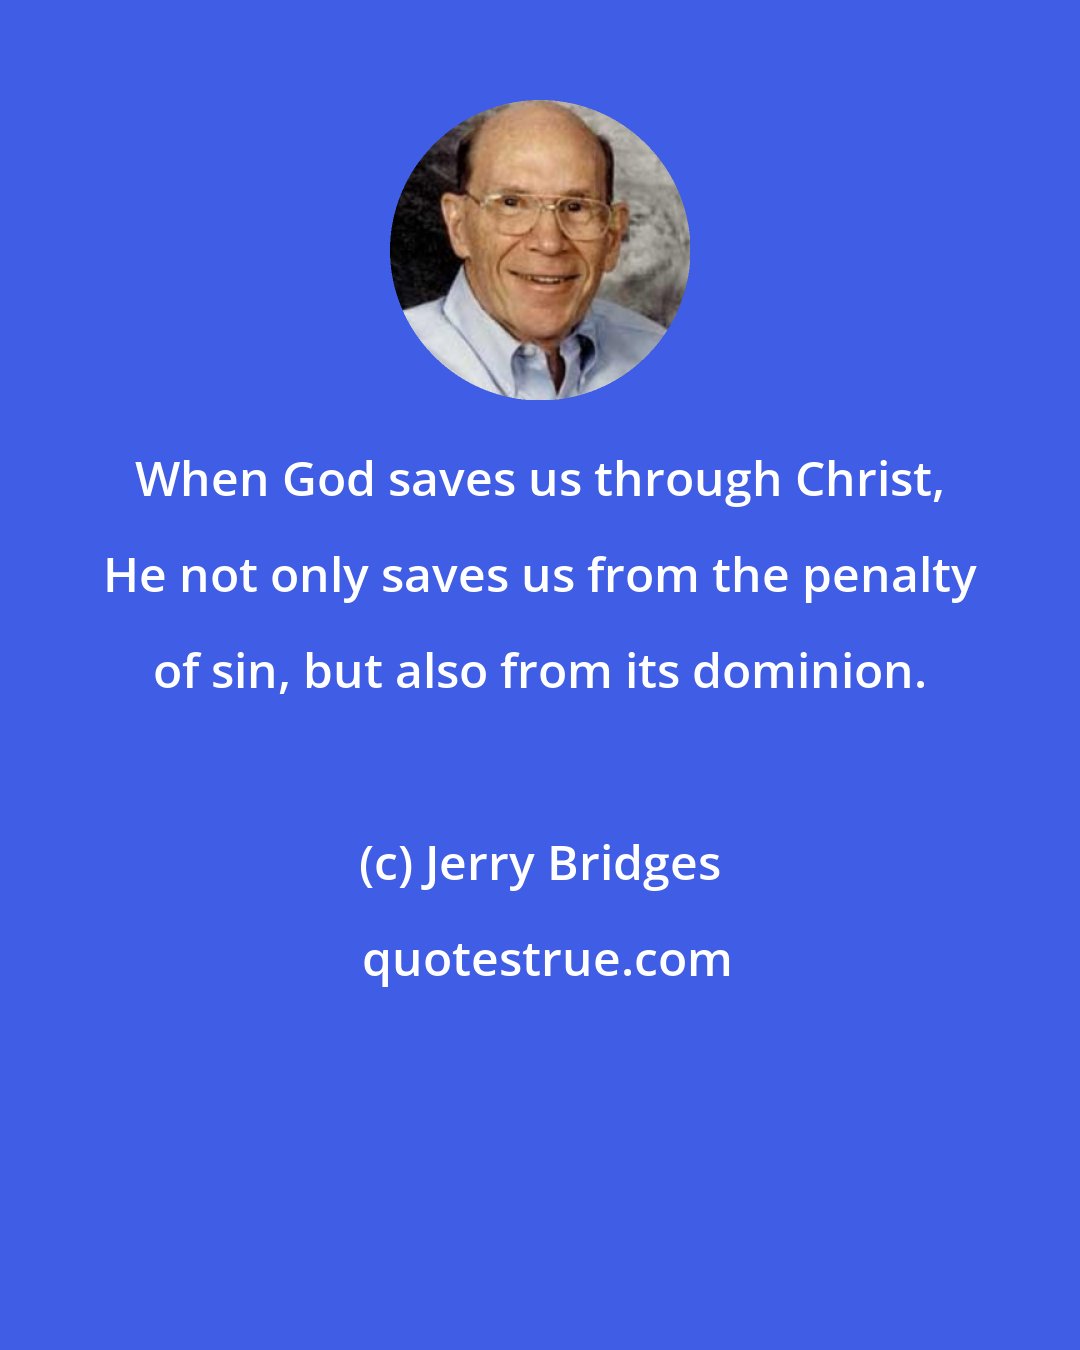 Jerry Bridges: When God saves us through Christ, He not only saves us from the penalty of sin, but also from its dominion.